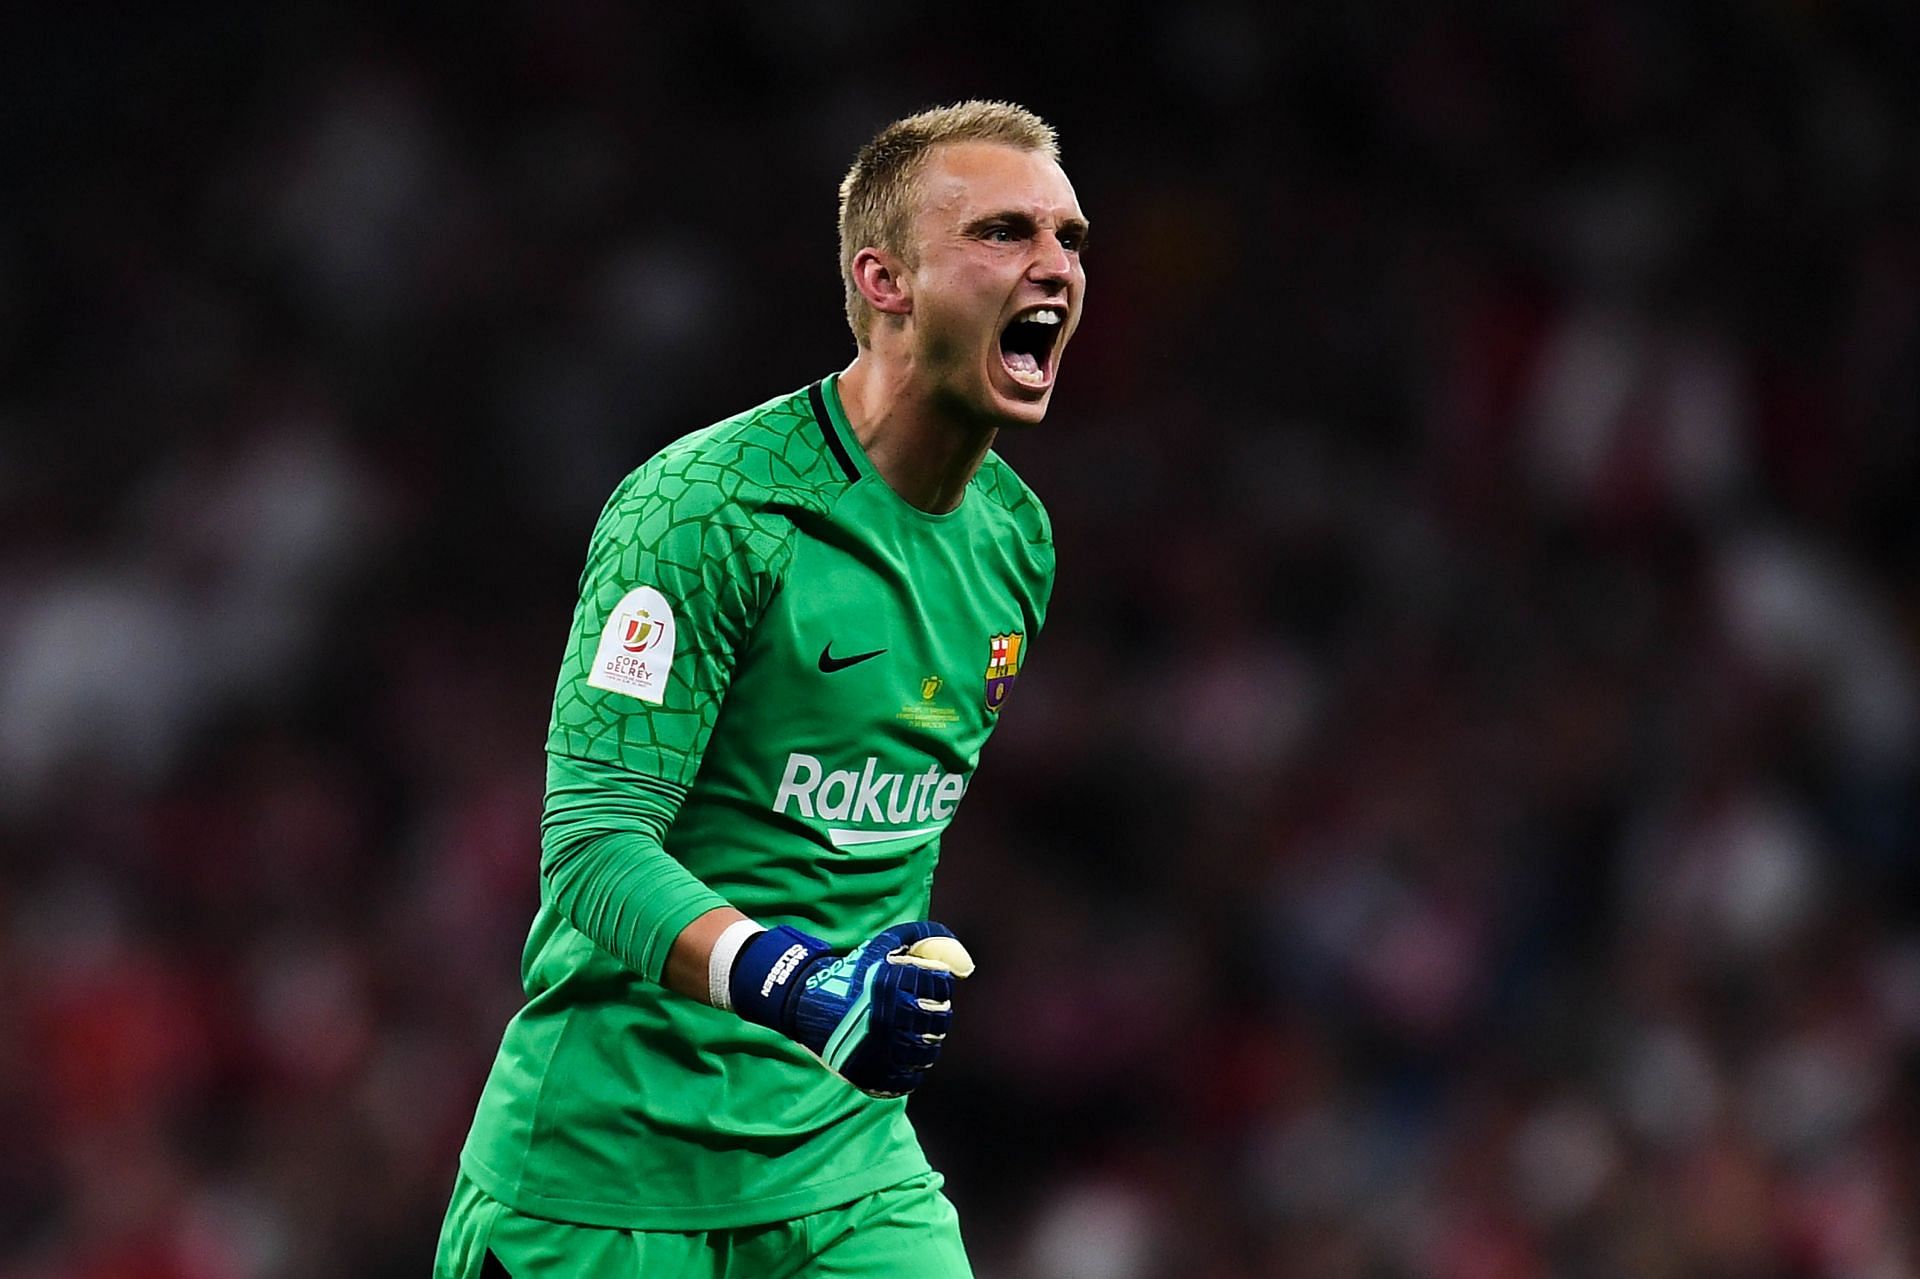 Jasper Cillessen struggled with game time with the Spanish giants.